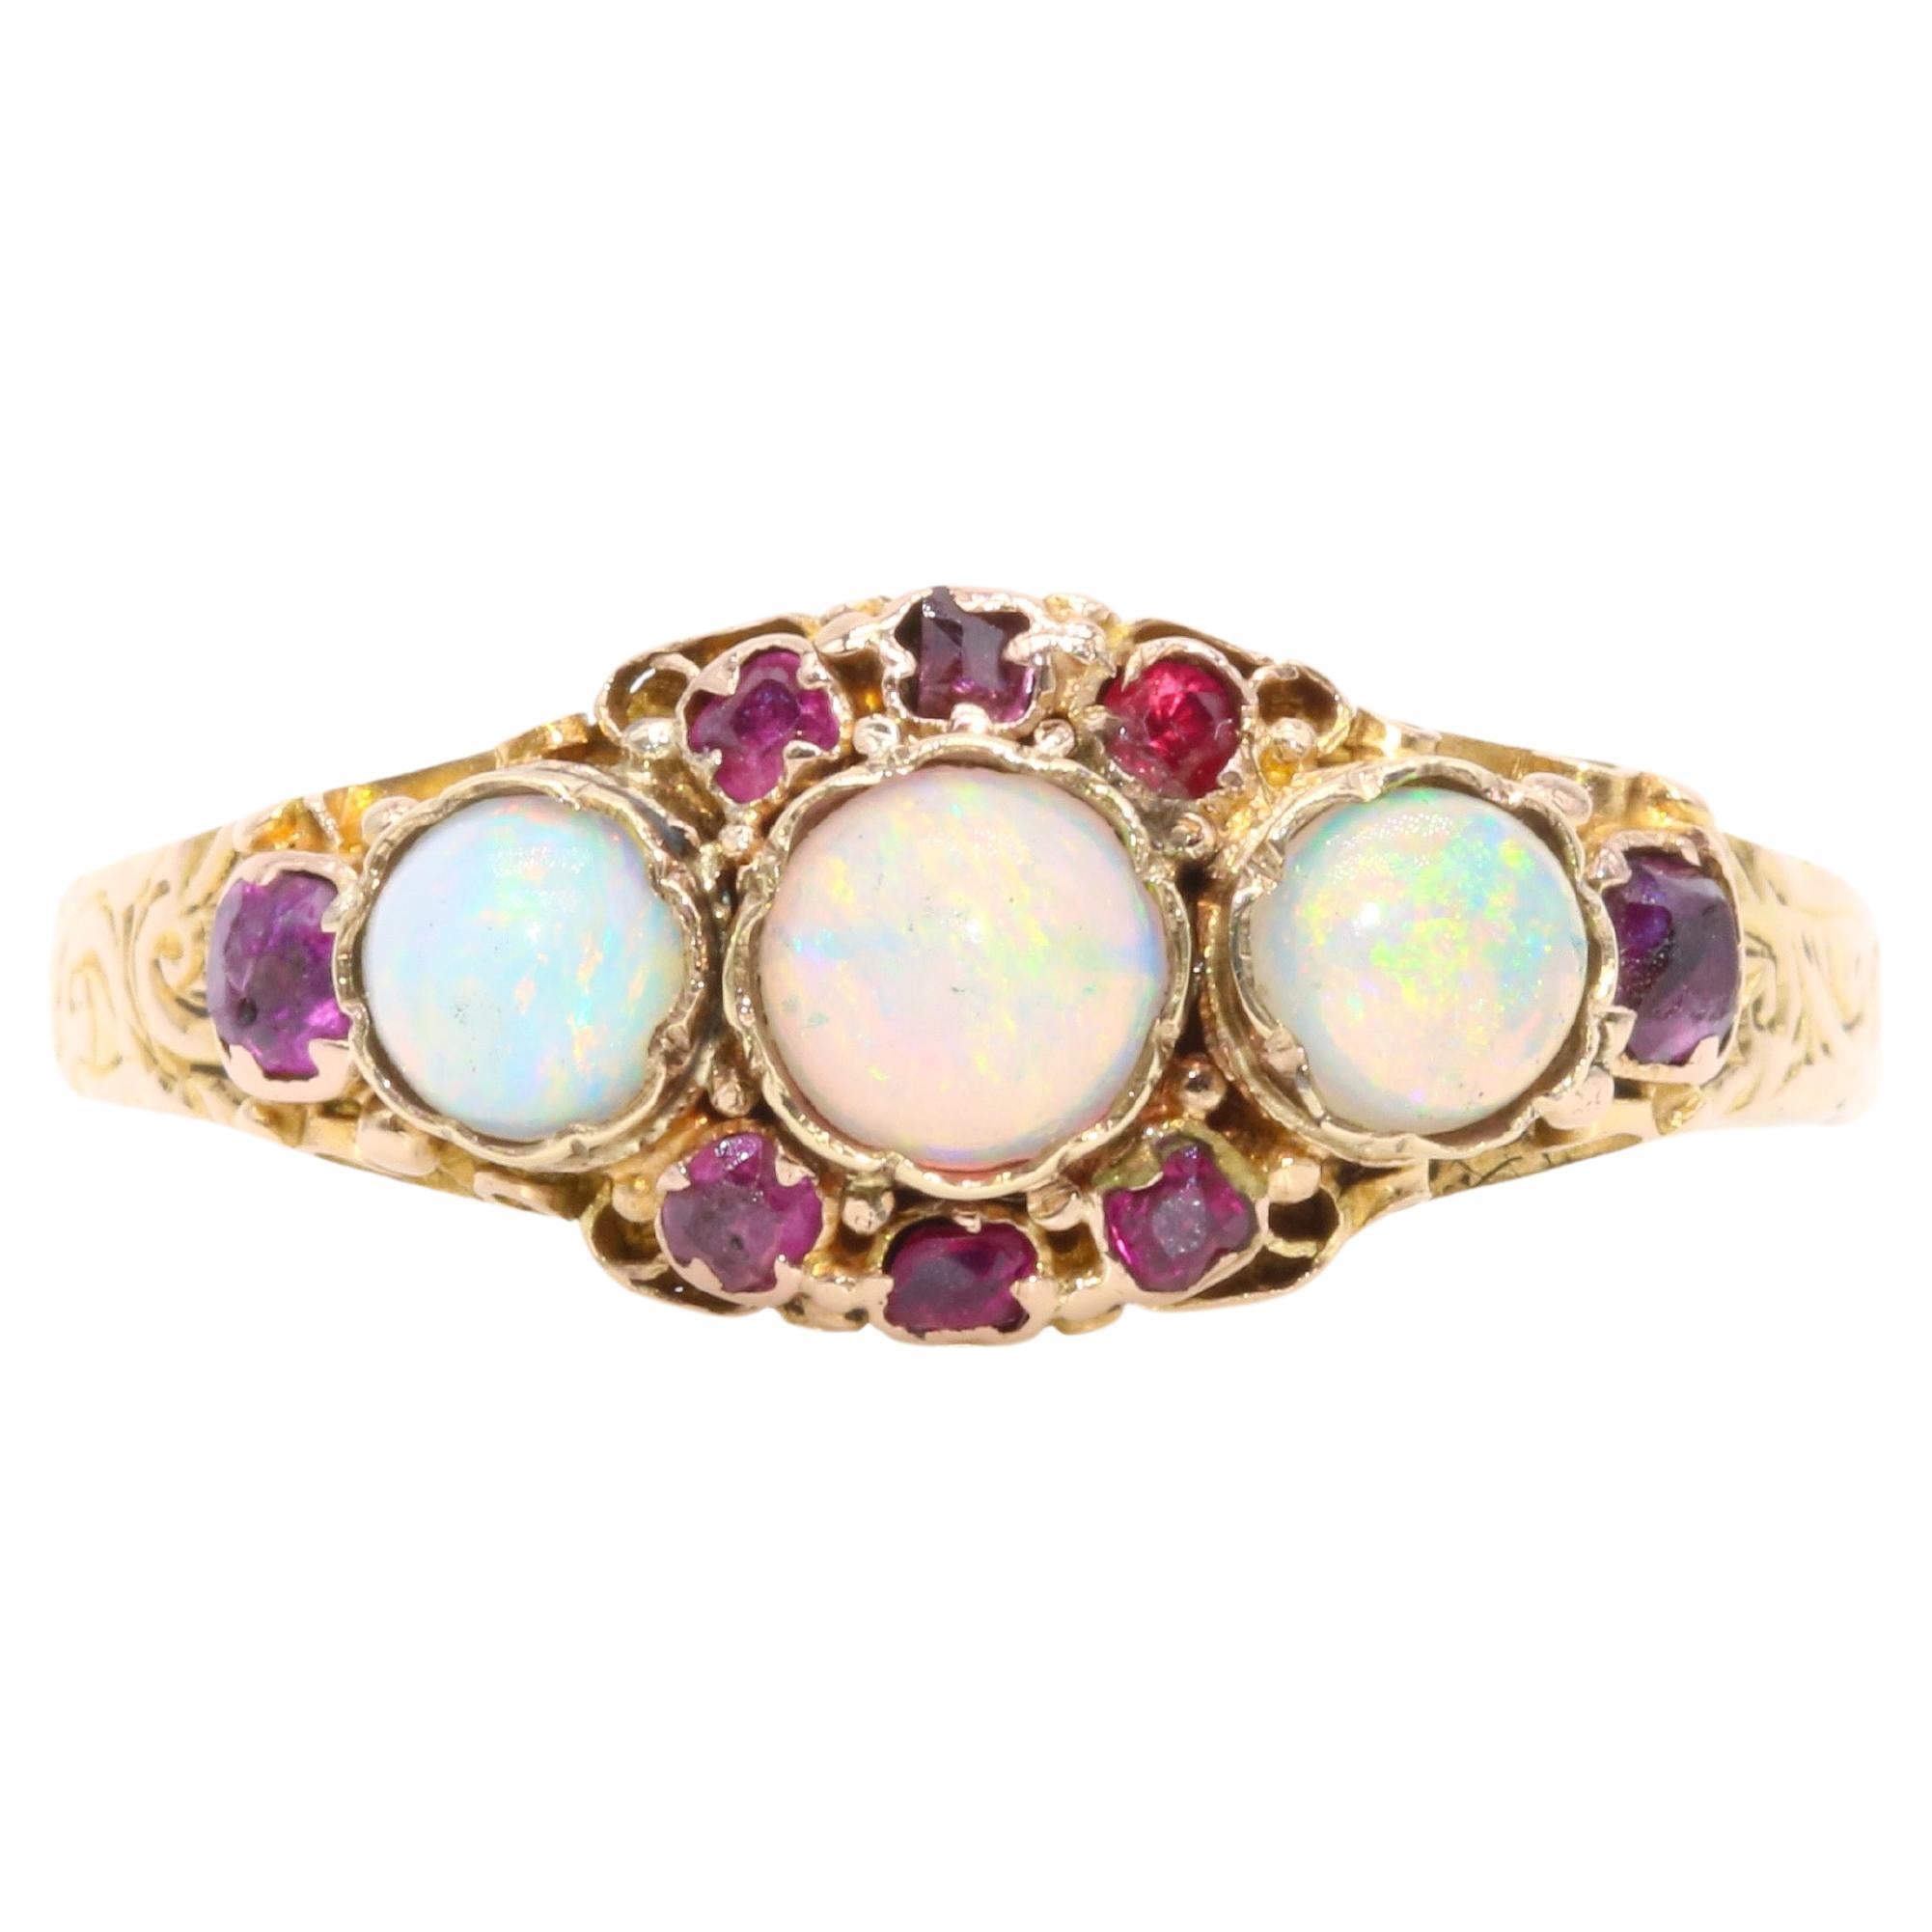 Antique Victorian 15K Yellow Gold Opal and Ruby Cluster Ring, with Engraved Band